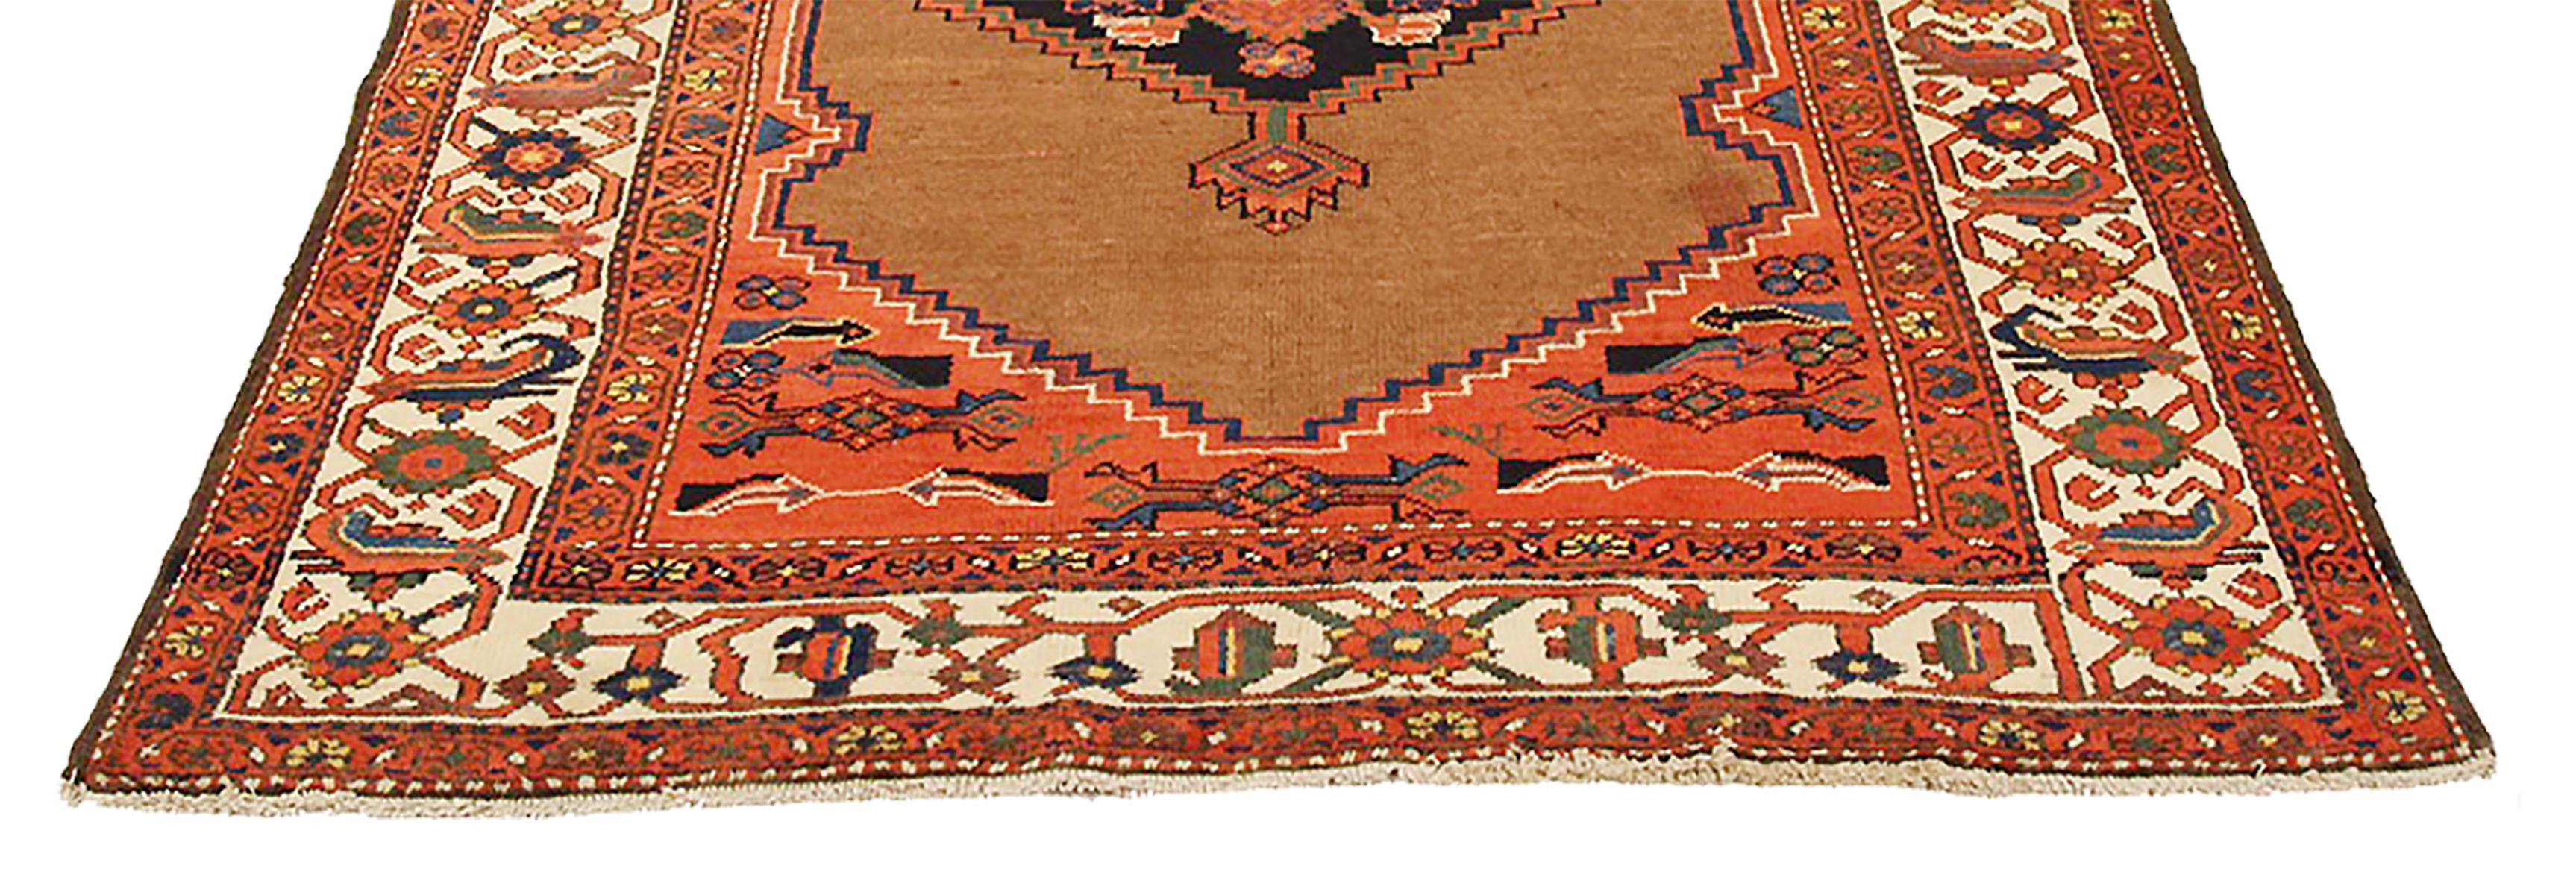 Islamic Antique Persian Hamadan Rug with Red & Black Florals on Beige & Orange Field For Sale